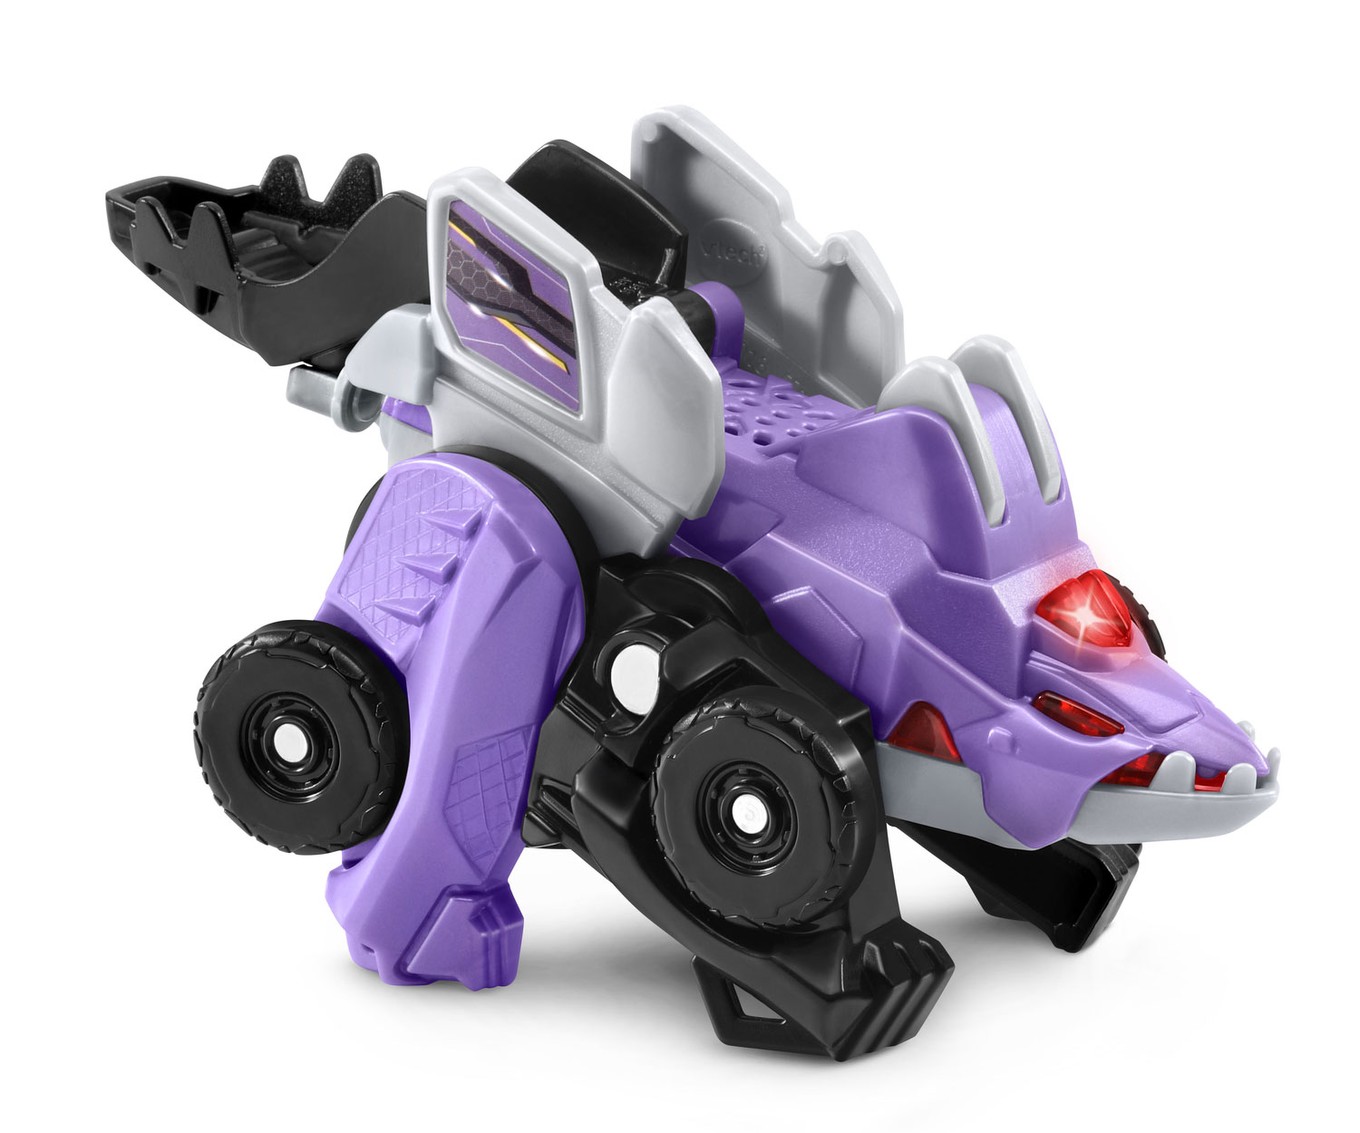 VTech® Switch & Go™ Velociraptor Helicopter Transform Dino to Vehicle